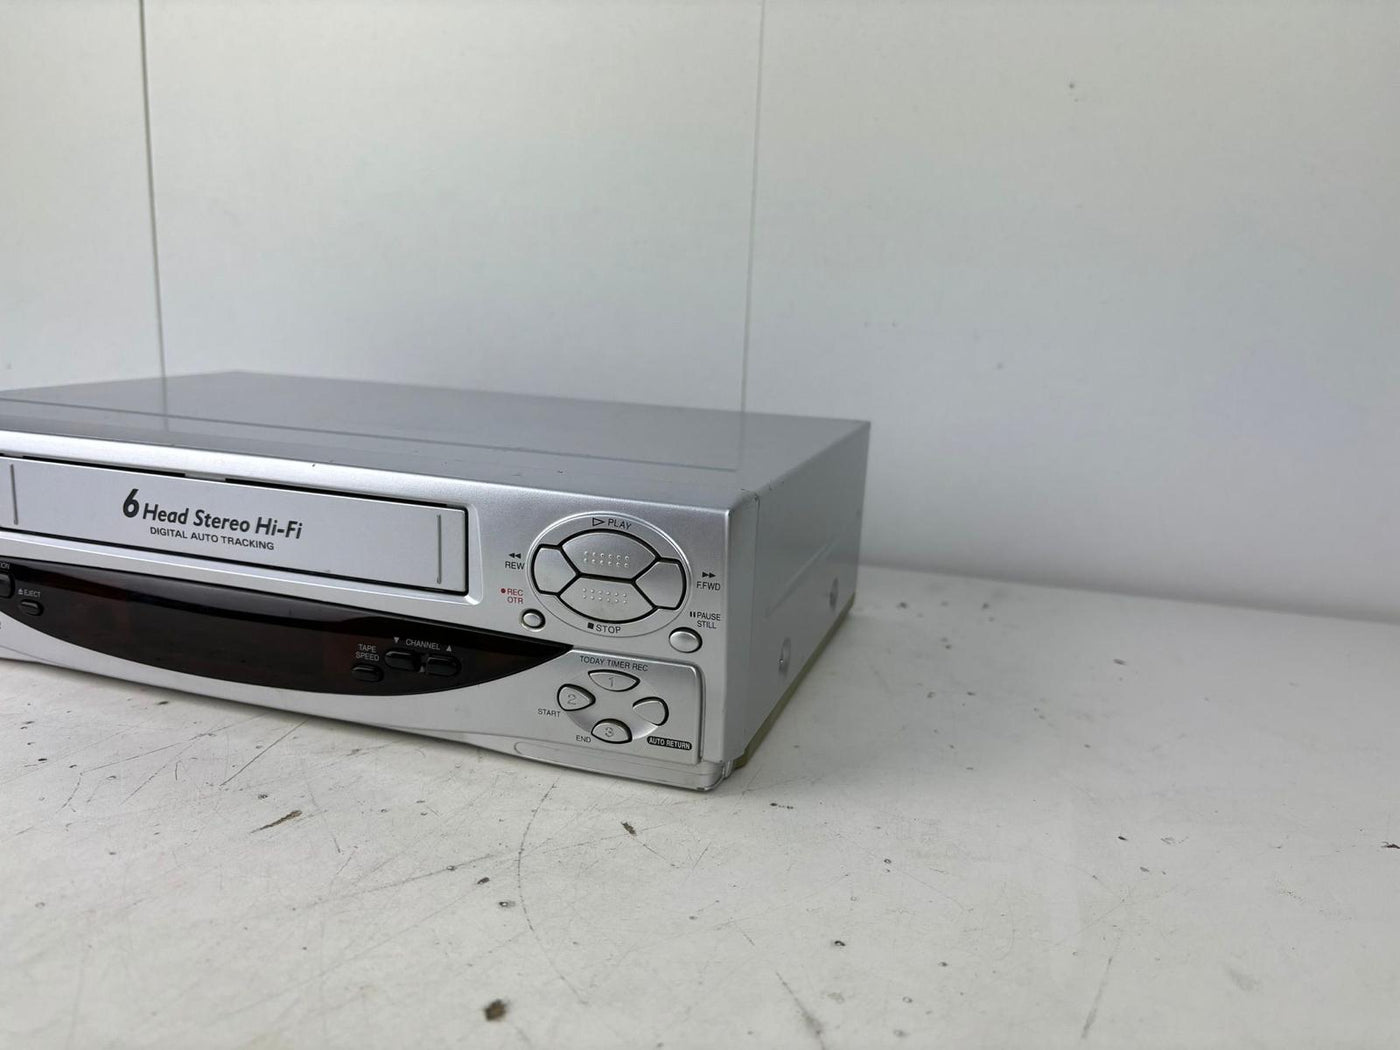 Funaj 23A-660 Video Cassette Recorder VHS With Remote!